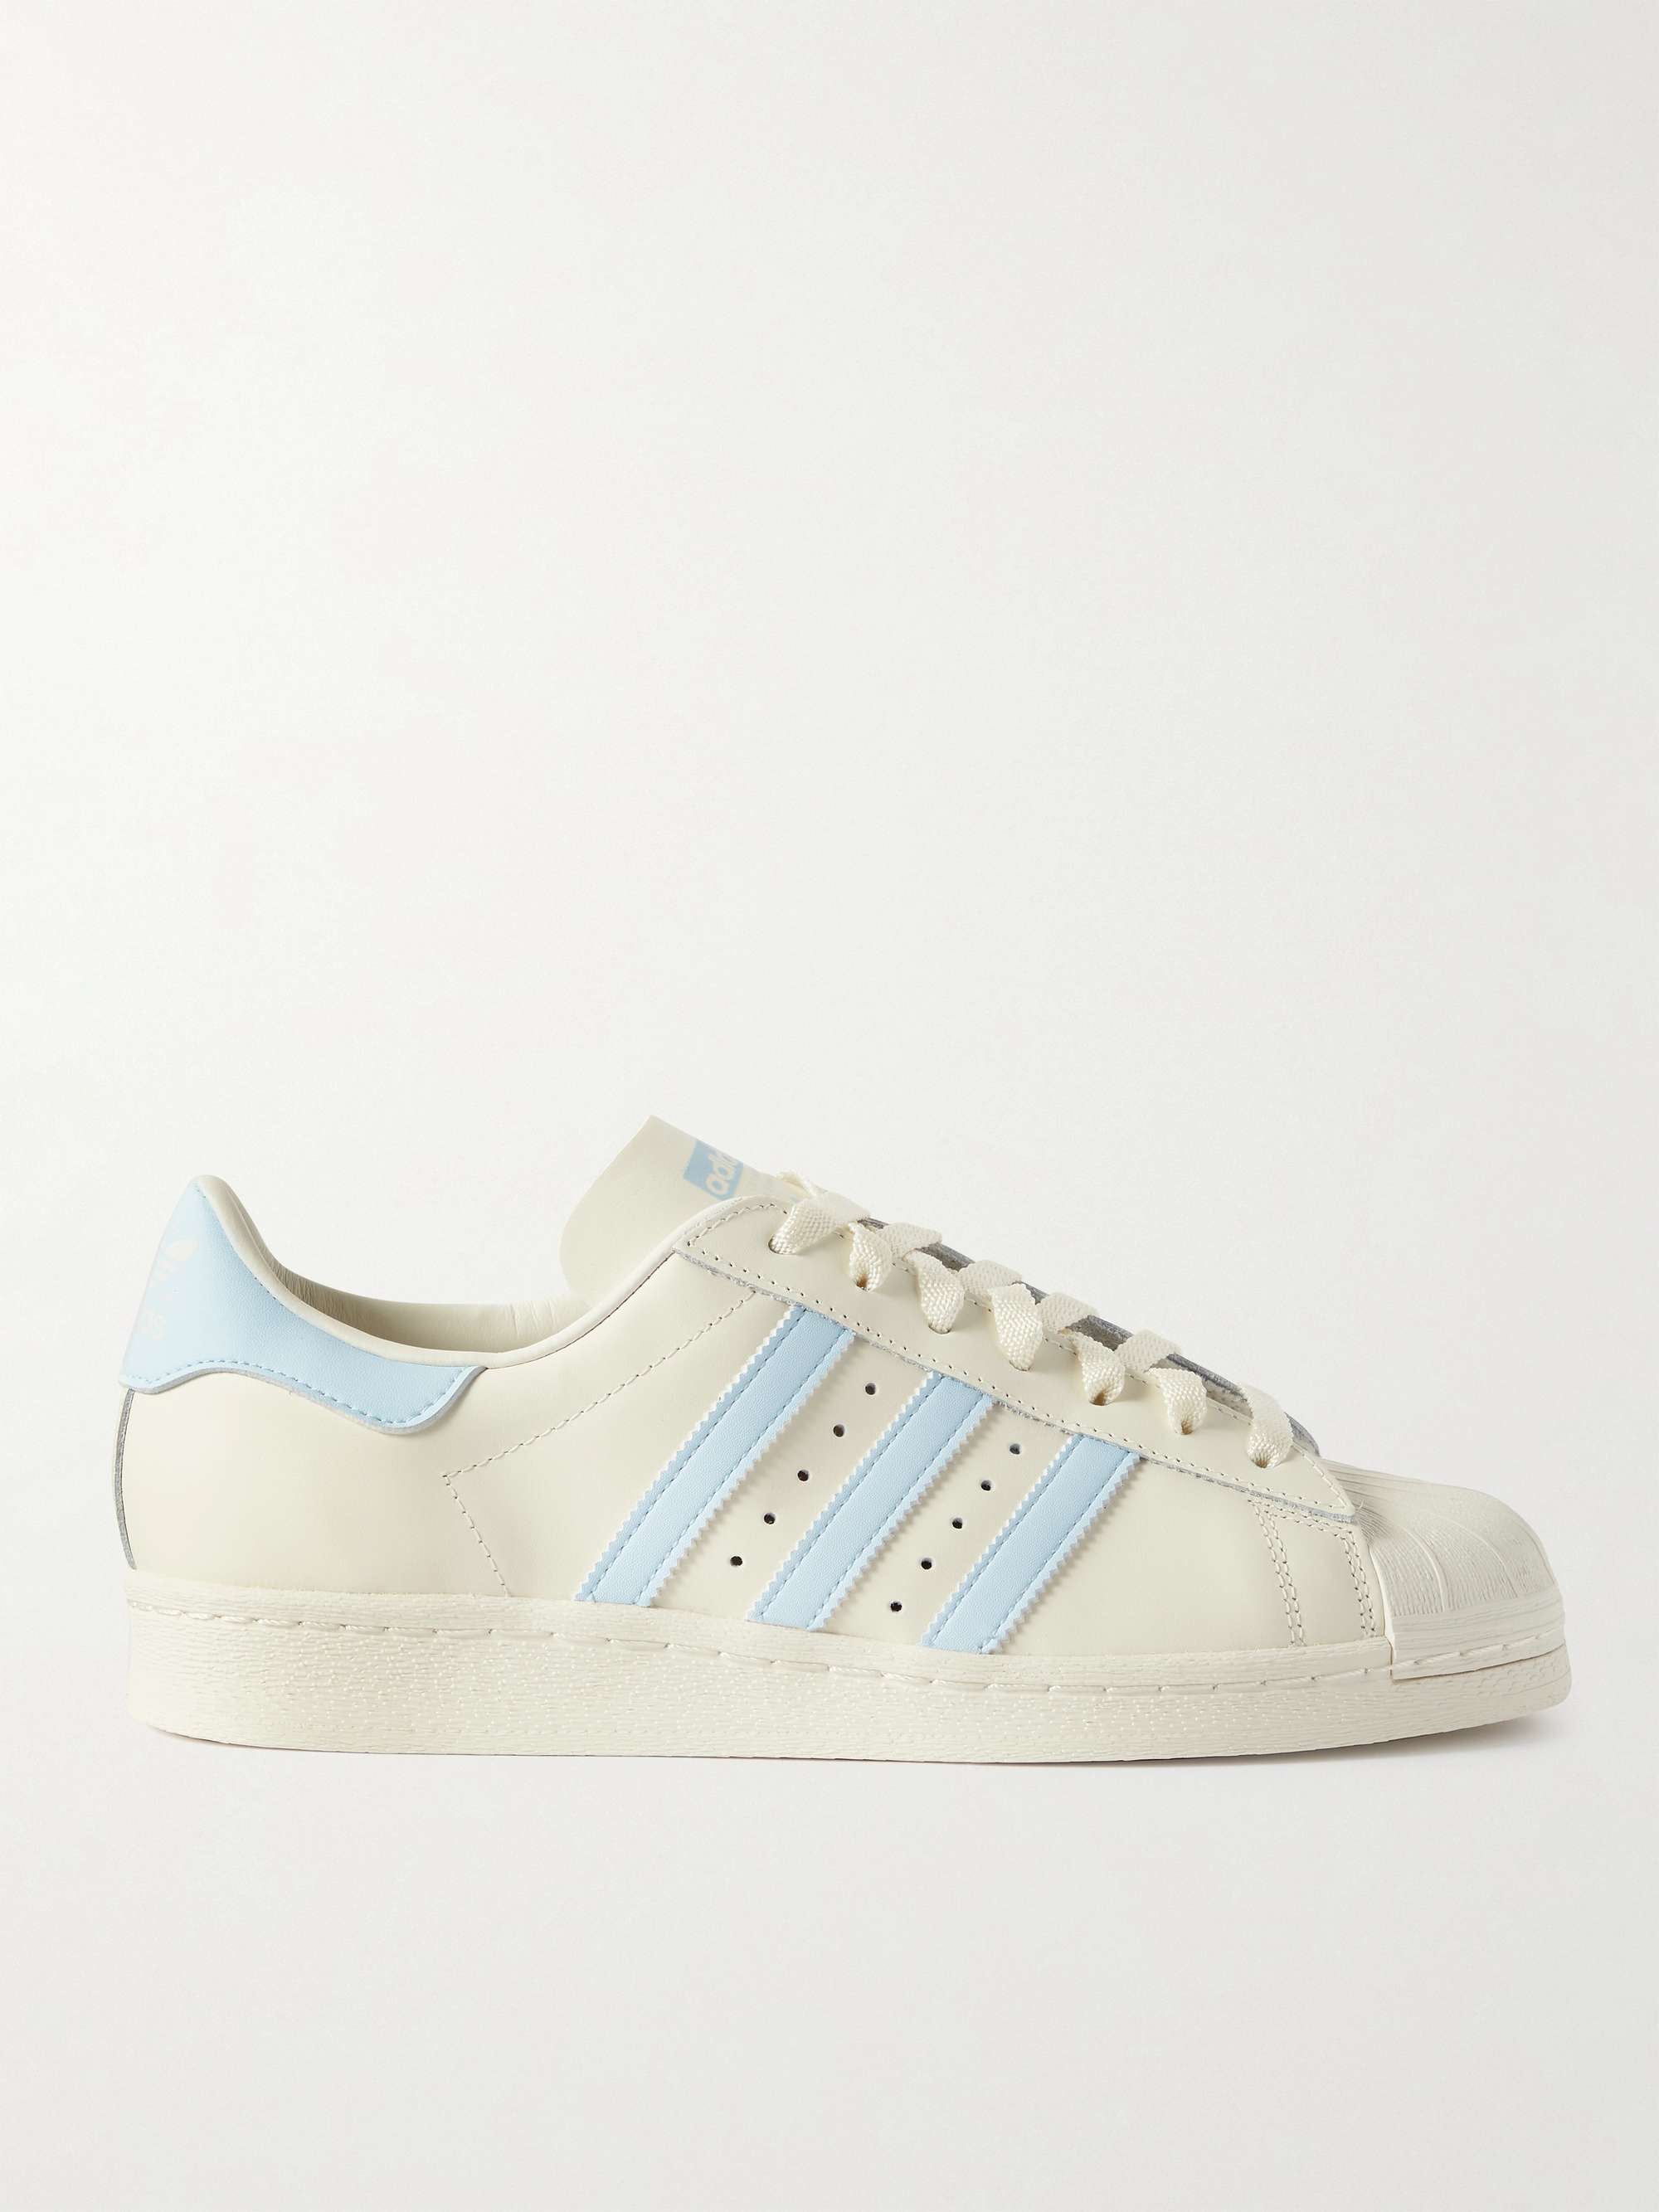 White Superstar 82 Rubber-Trimmed Leather Sneakers | ADIDAS ORIGINALS | MR  PORTER